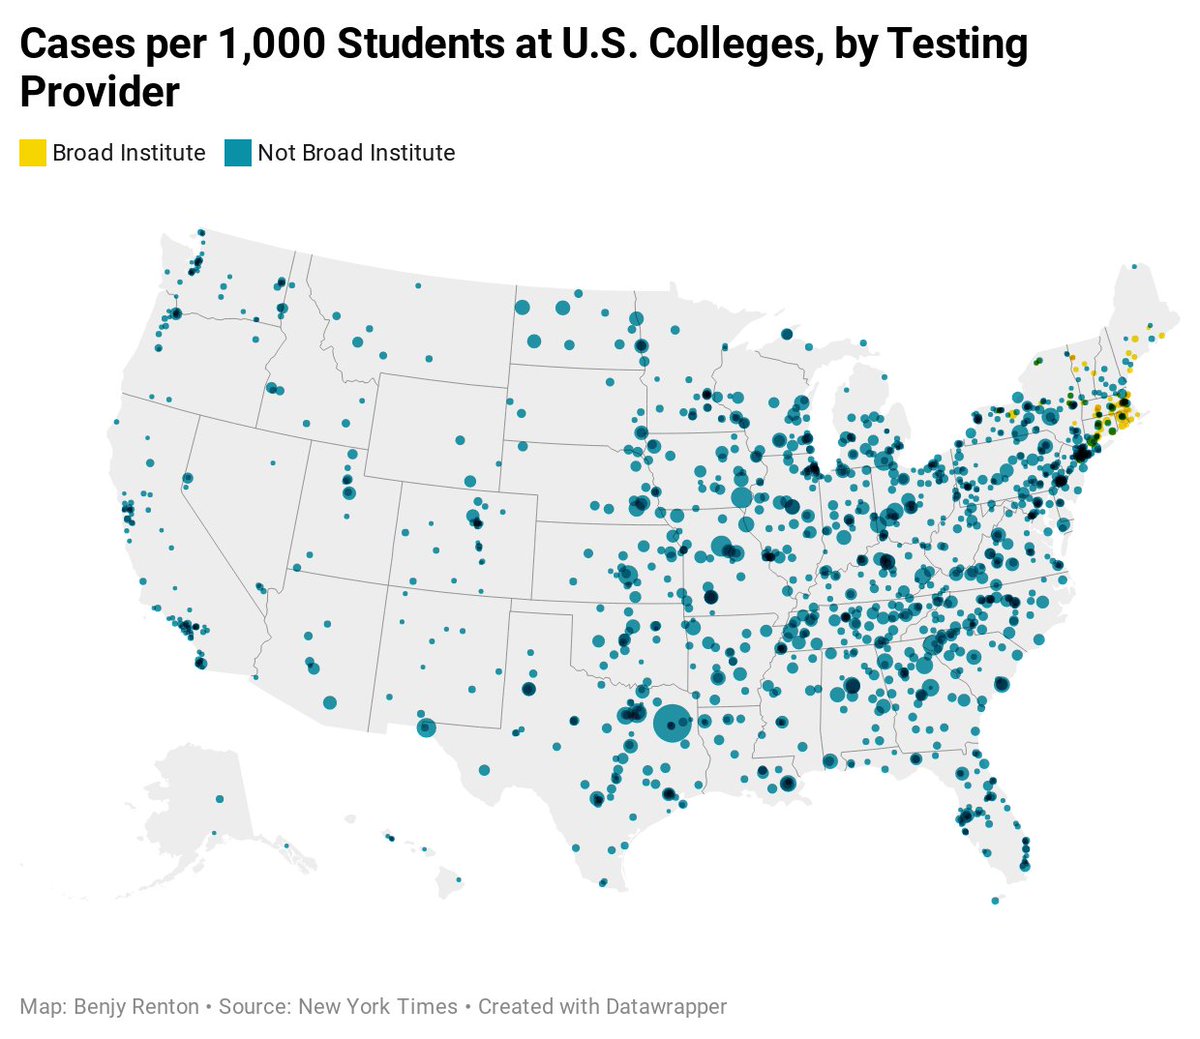 Much has been said about the success of  @broadinstitute's genomics lab, which provides testing for 108 colleges in the Northeast. When we use  @nytimes data to compare 88 of the 108 schools vs. 1400+ in the country, we see significantly lower case counts in schools that use Broad.